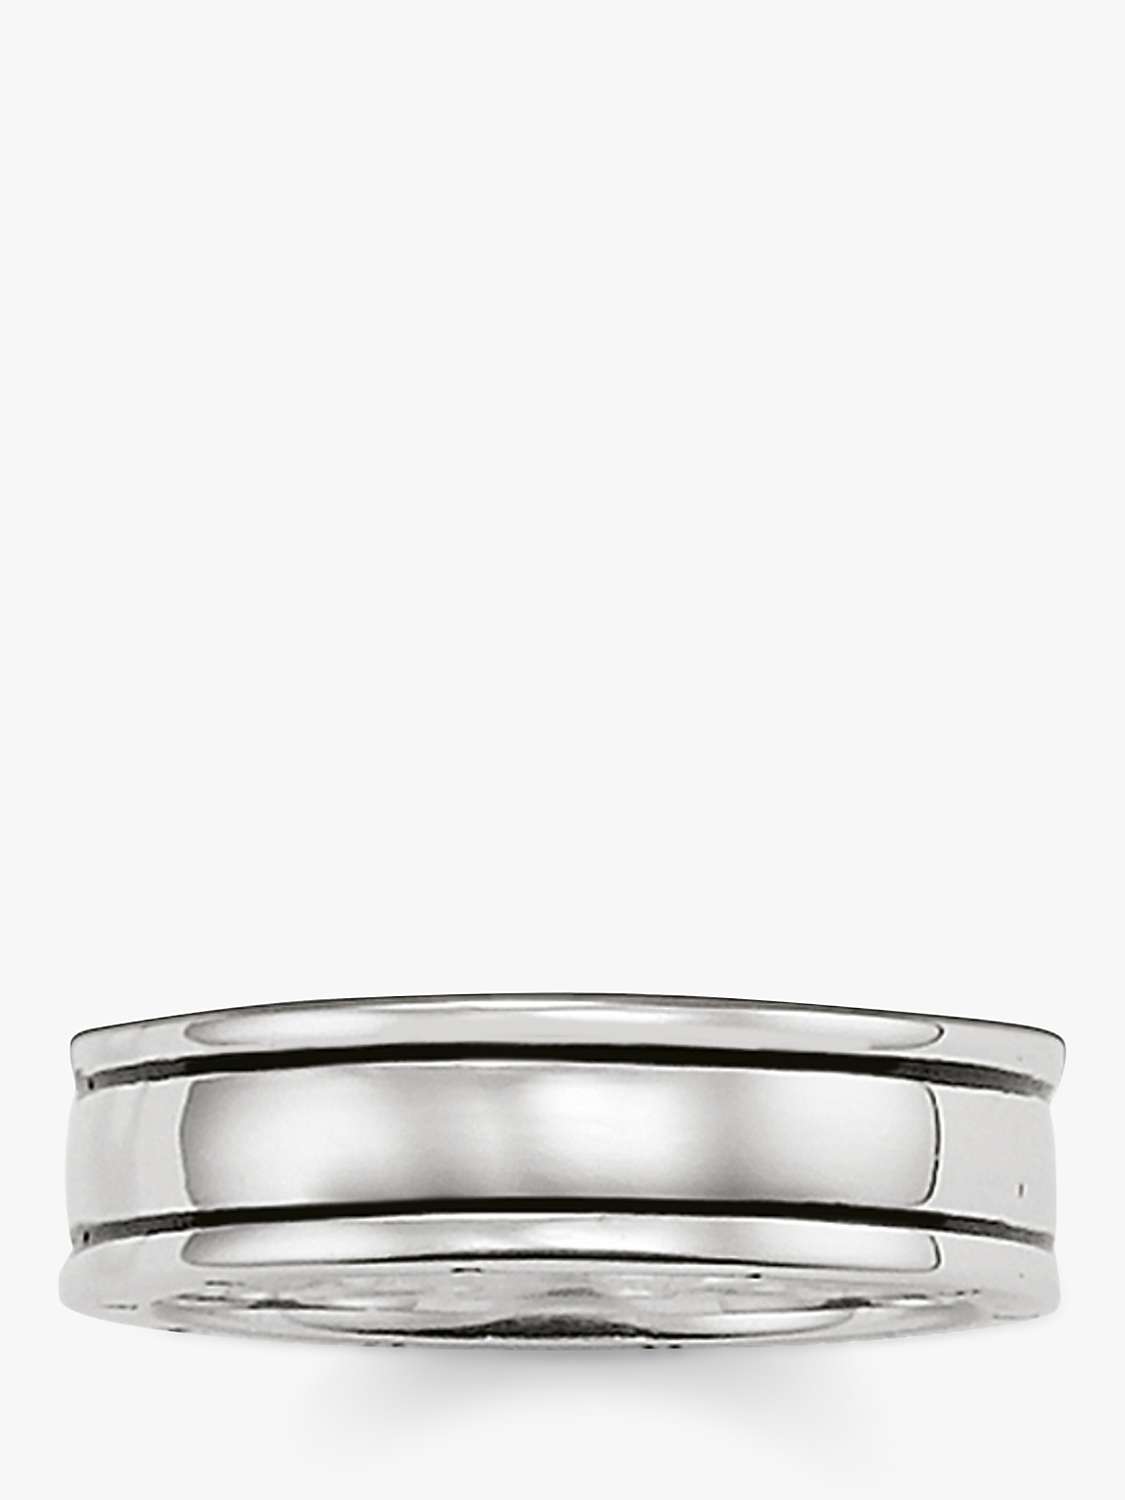 Buy THOMAS SABO Blackened Sterling Silver Band Ring, Silver Online at johnlewis.com